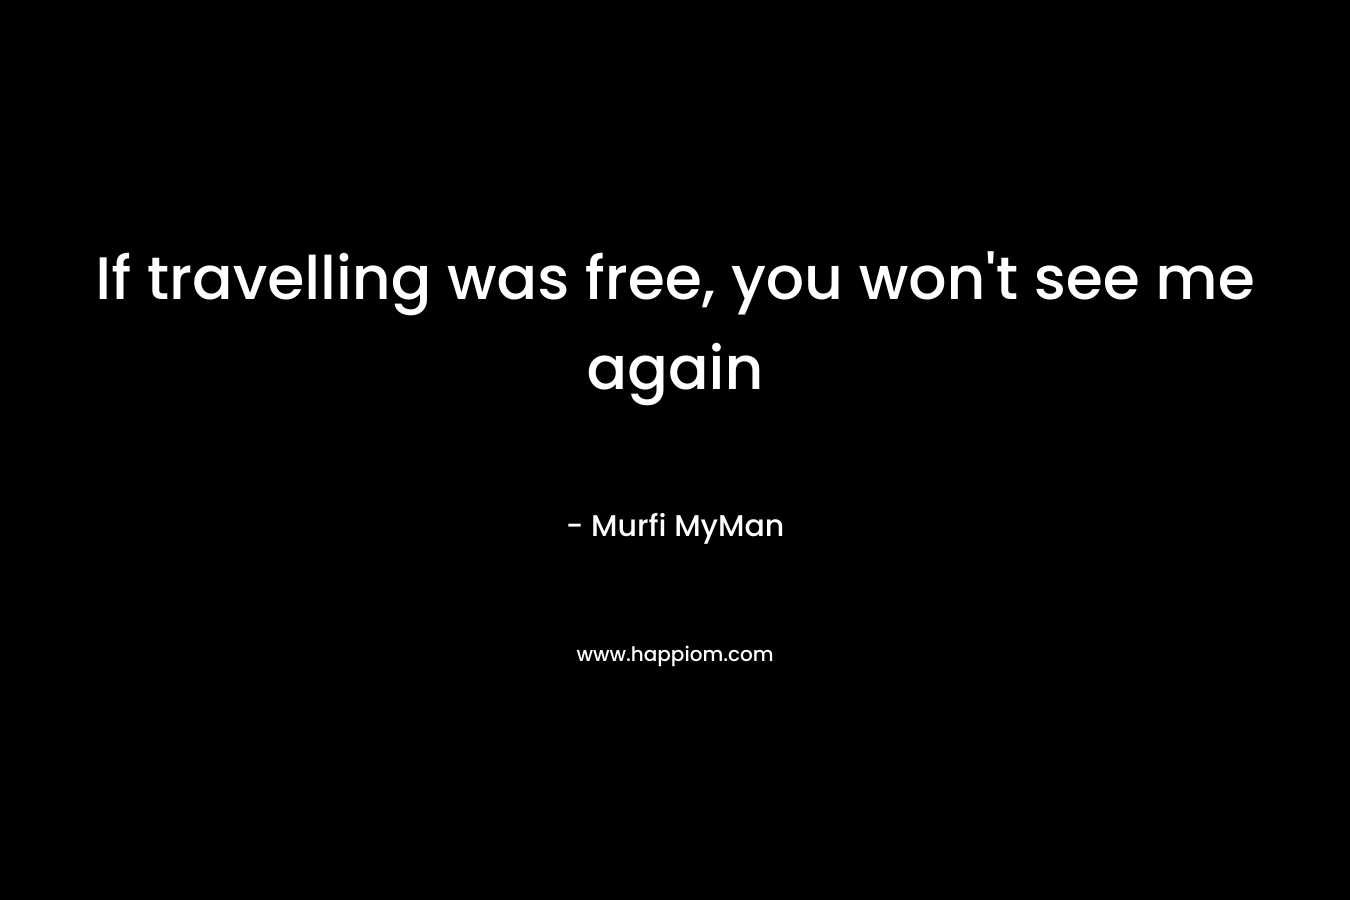 If travelling was free, you won't see me again